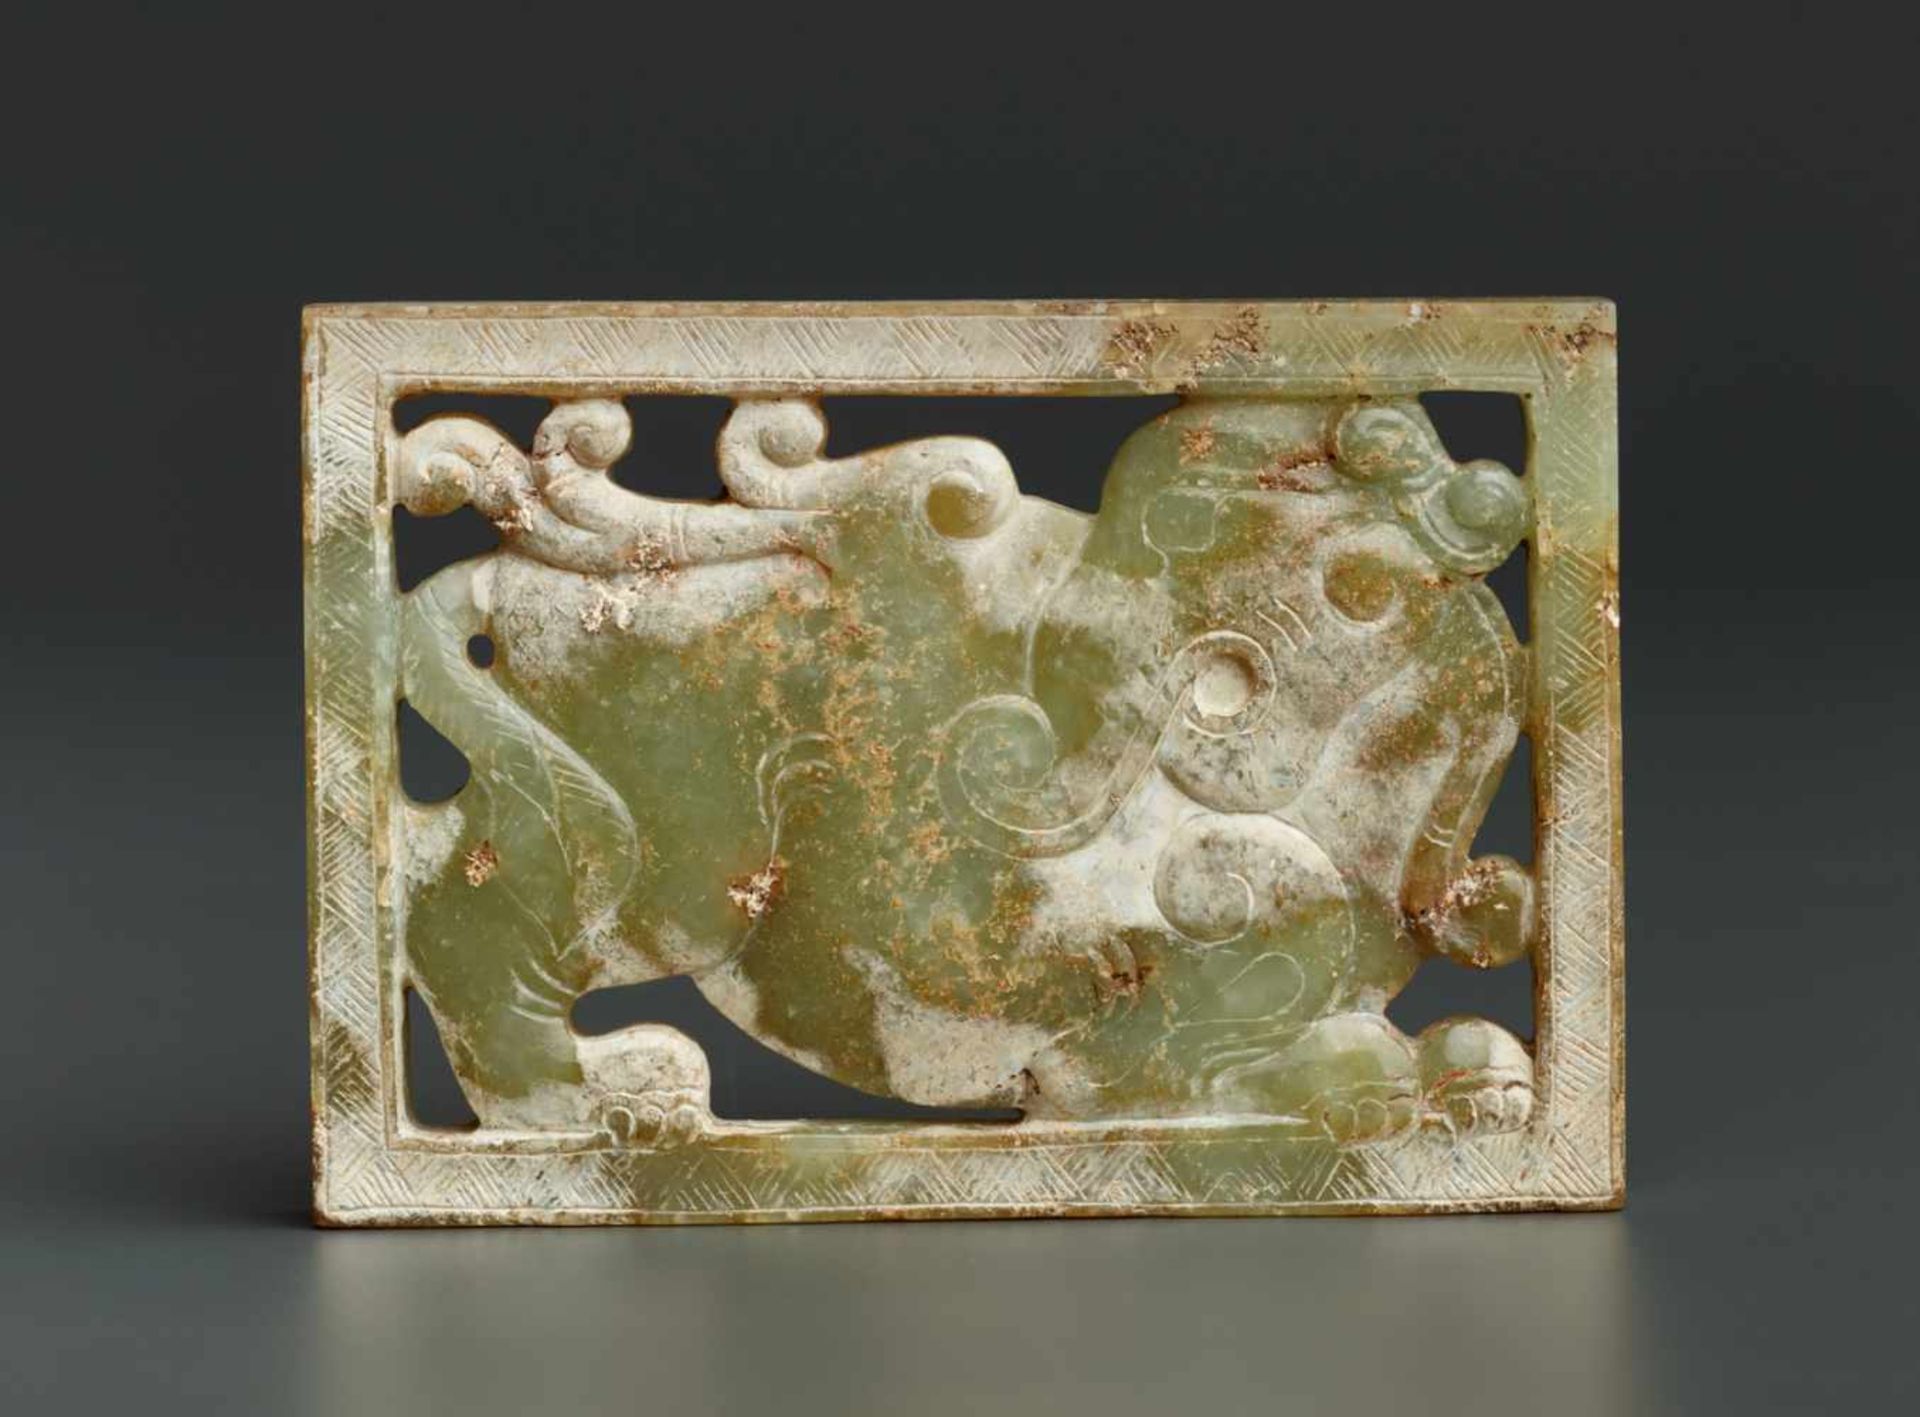 A RECTANGULAR PLAQUE IN CELEADON COLOURED JADE WITH AN ELEPHANT CARVED IN OPENWORK Jade. China,